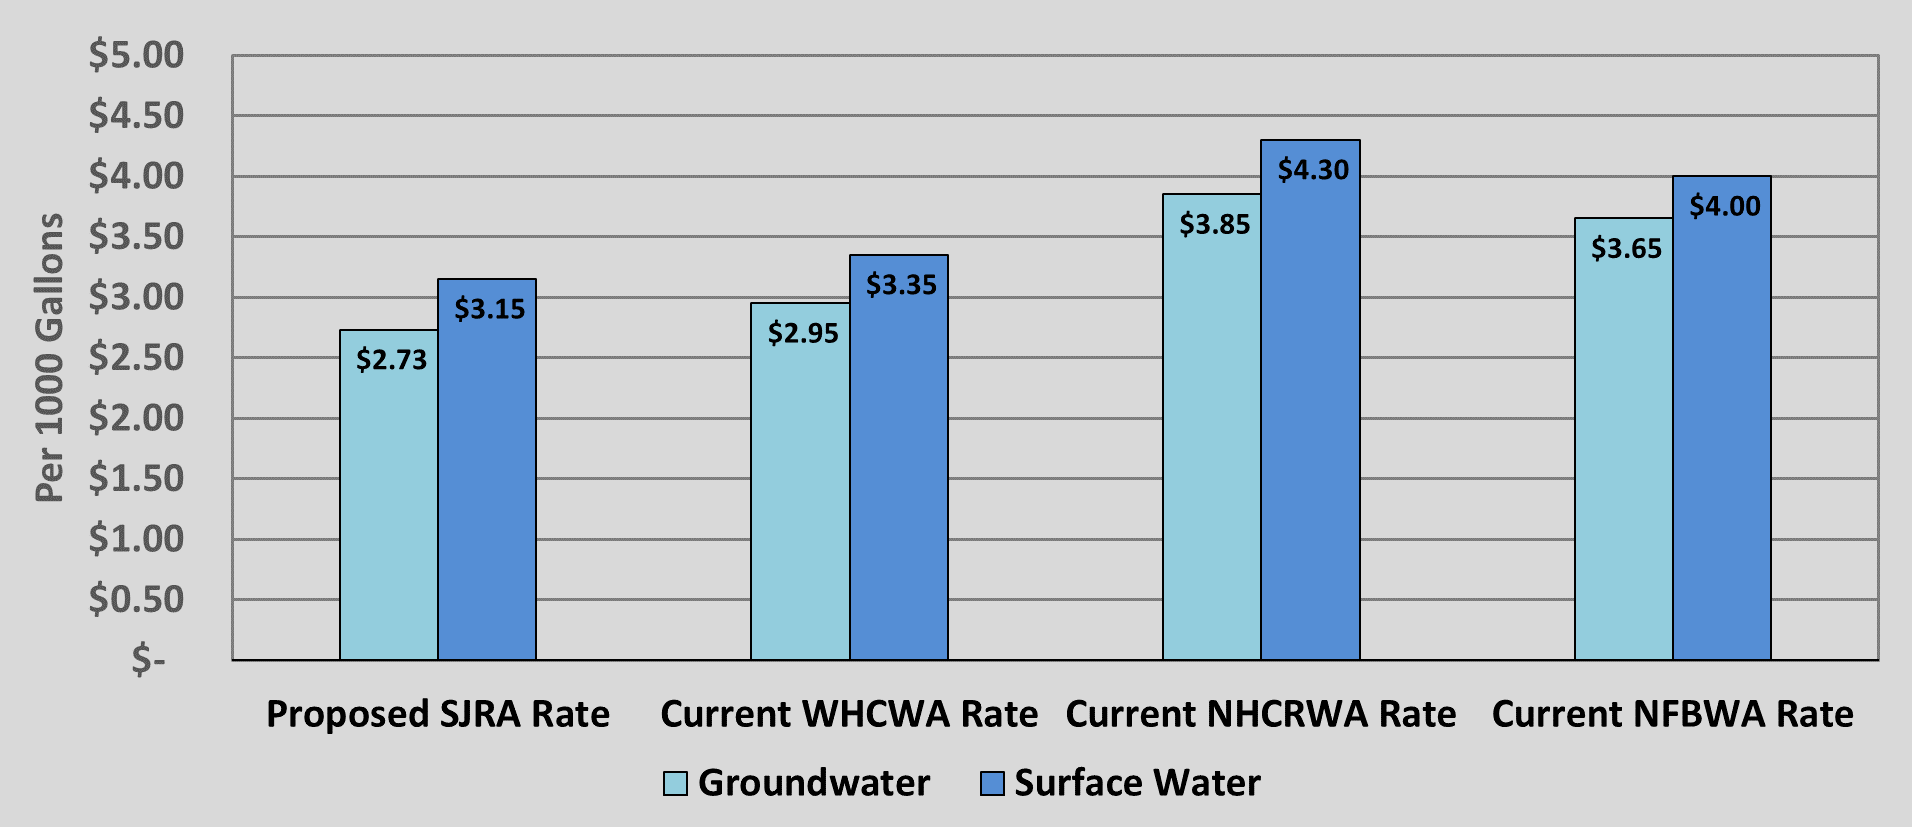 Rate Comparison to West Harris County Water Authority and North Harris County Water Authority Rates